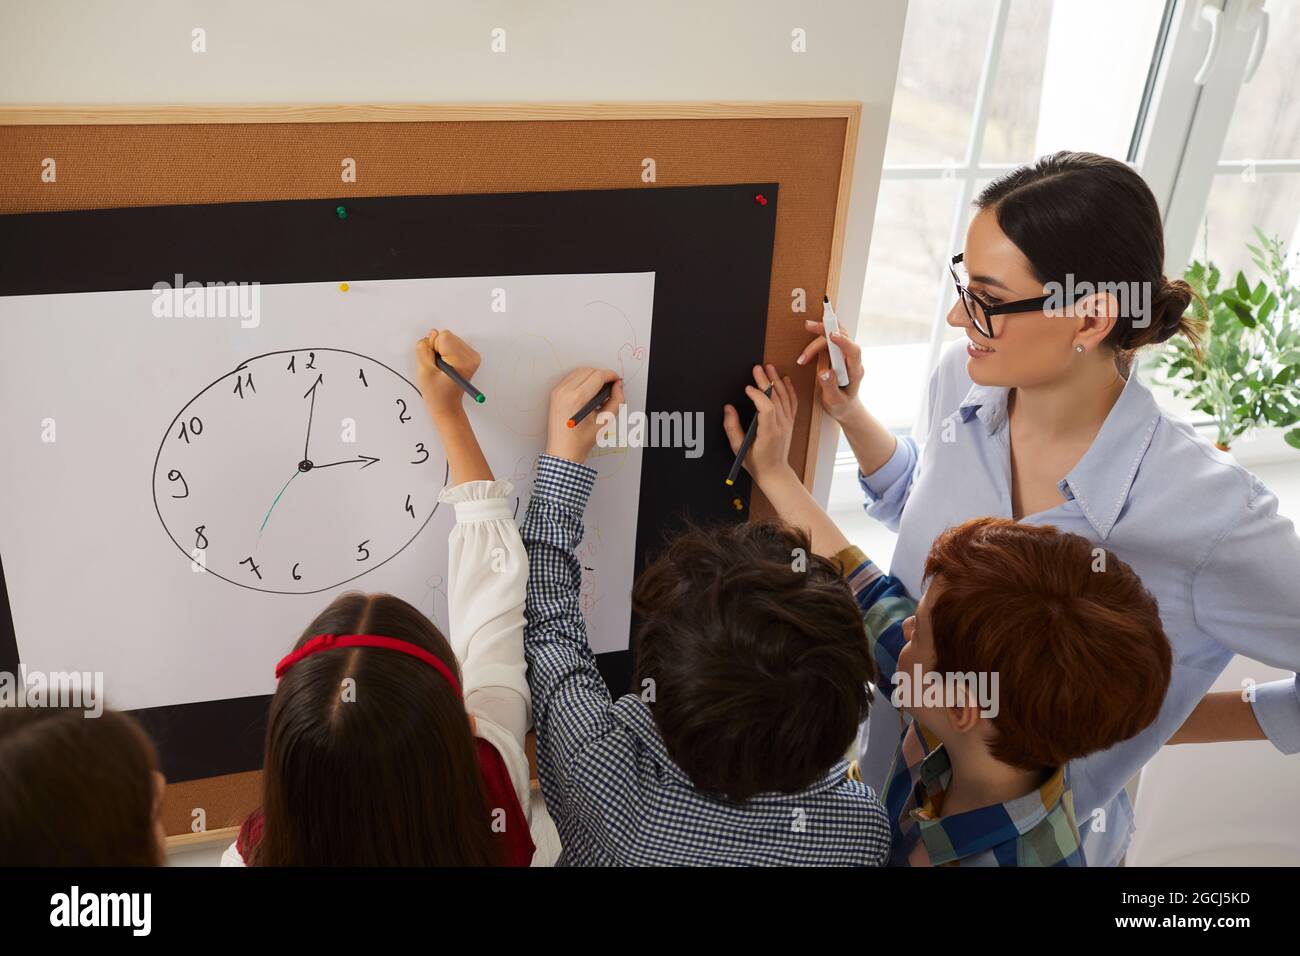 Group of elementary school students drawing a clock and learning to tell the time Stock Photo